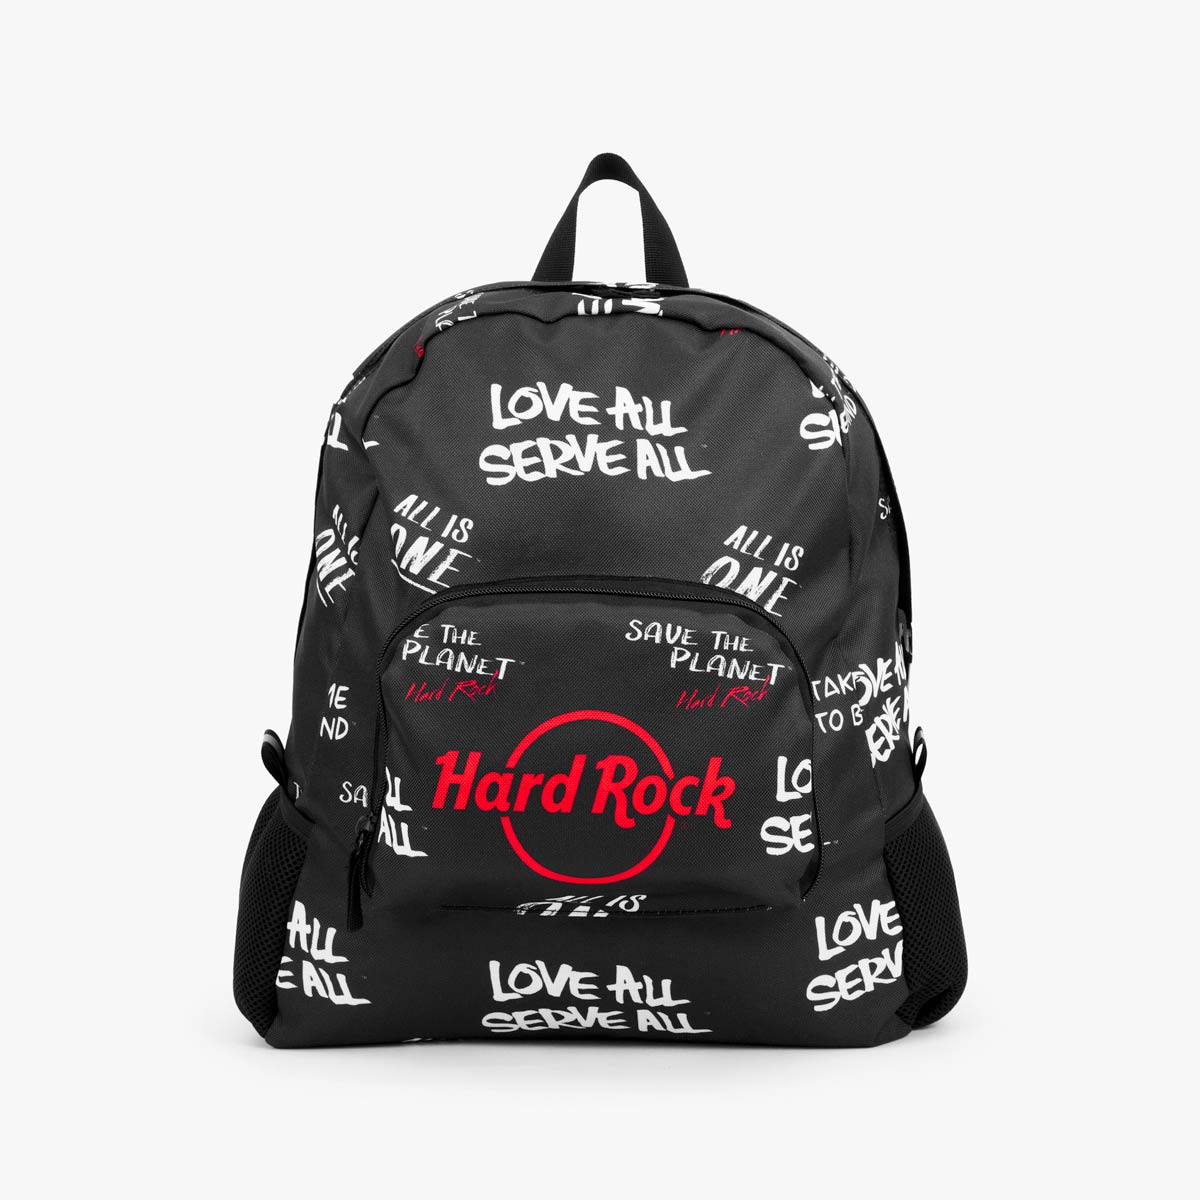 Love All Serve All Graffiti Packable Backpack in Black image number 1